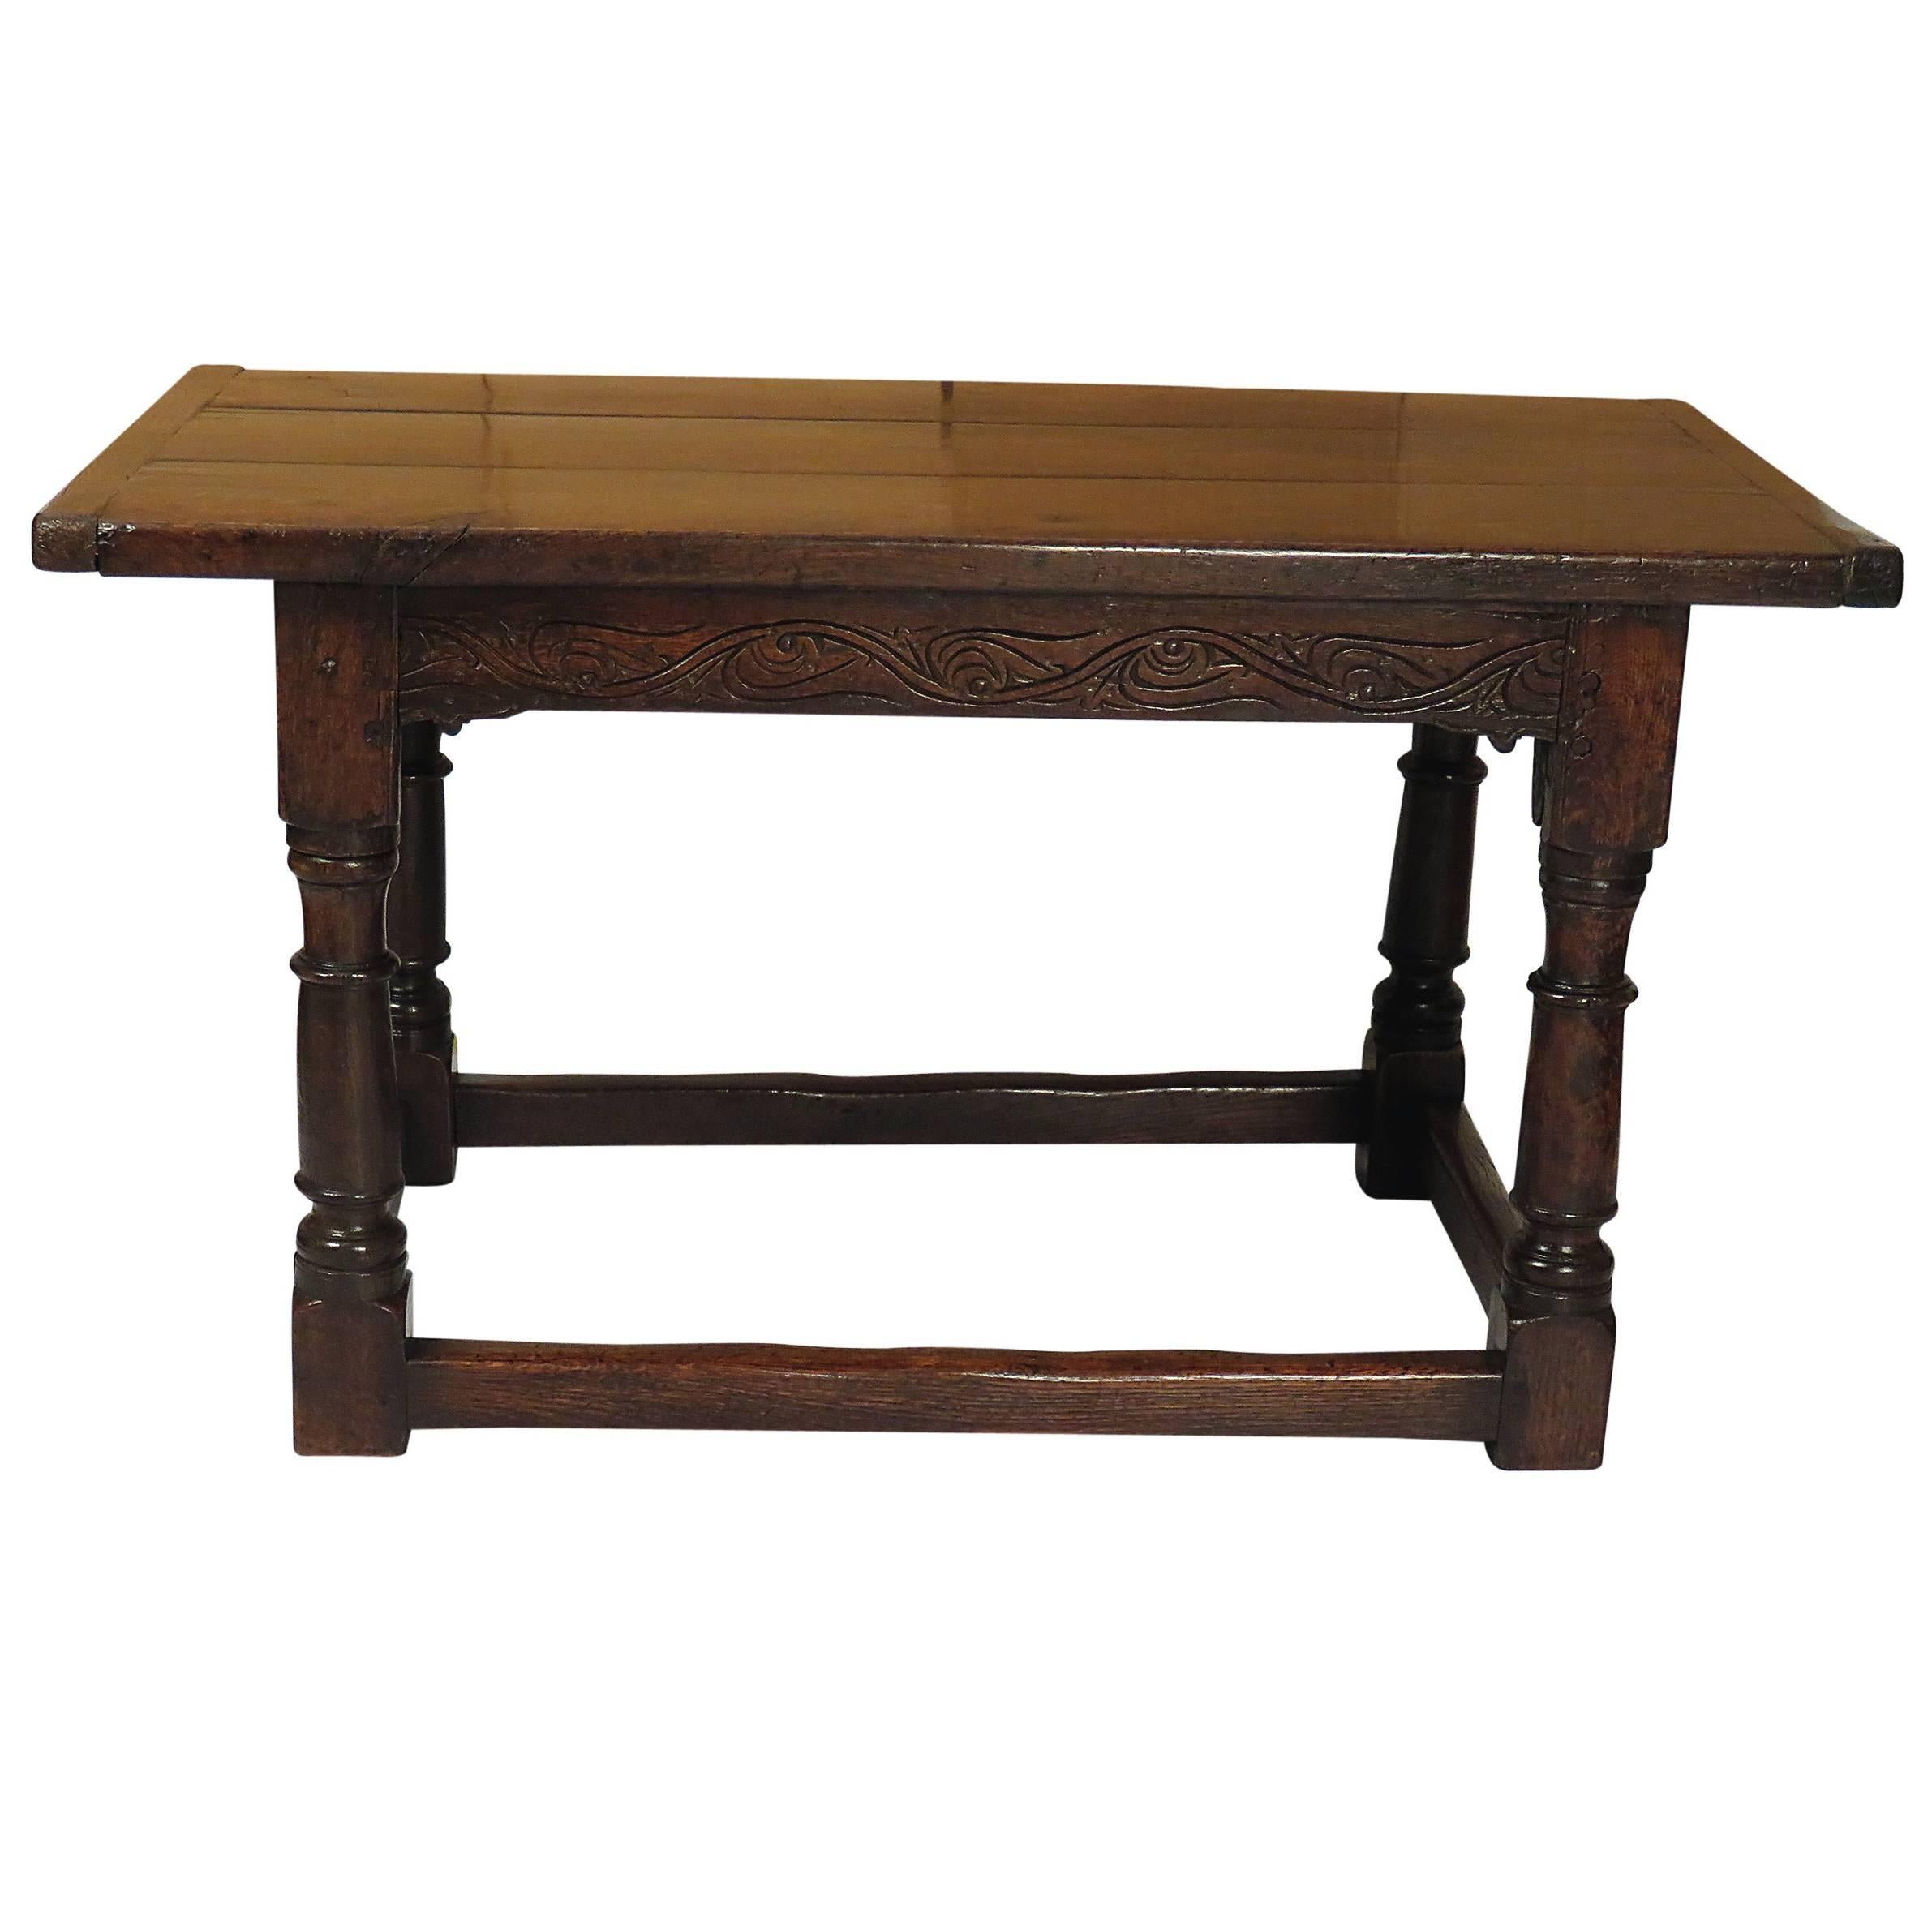 Nice Old Tavern or Work Table, Chestnut Made in Italy or Spain, circa 1780  